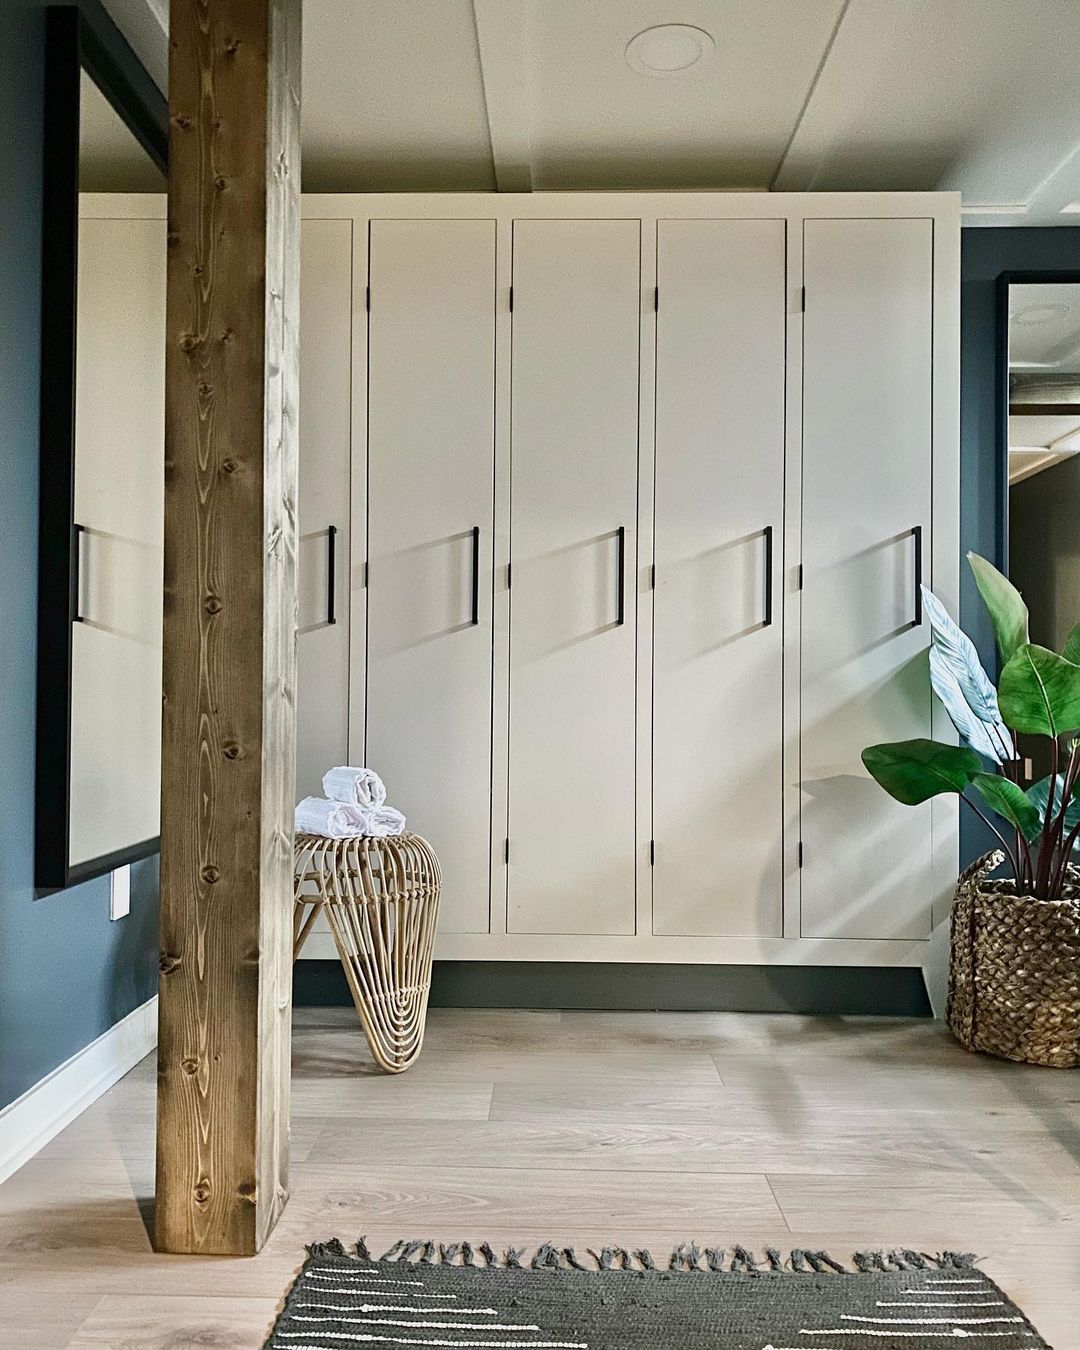 Large white lockers in a meditation space. Photo by Instagram user @akrenovate